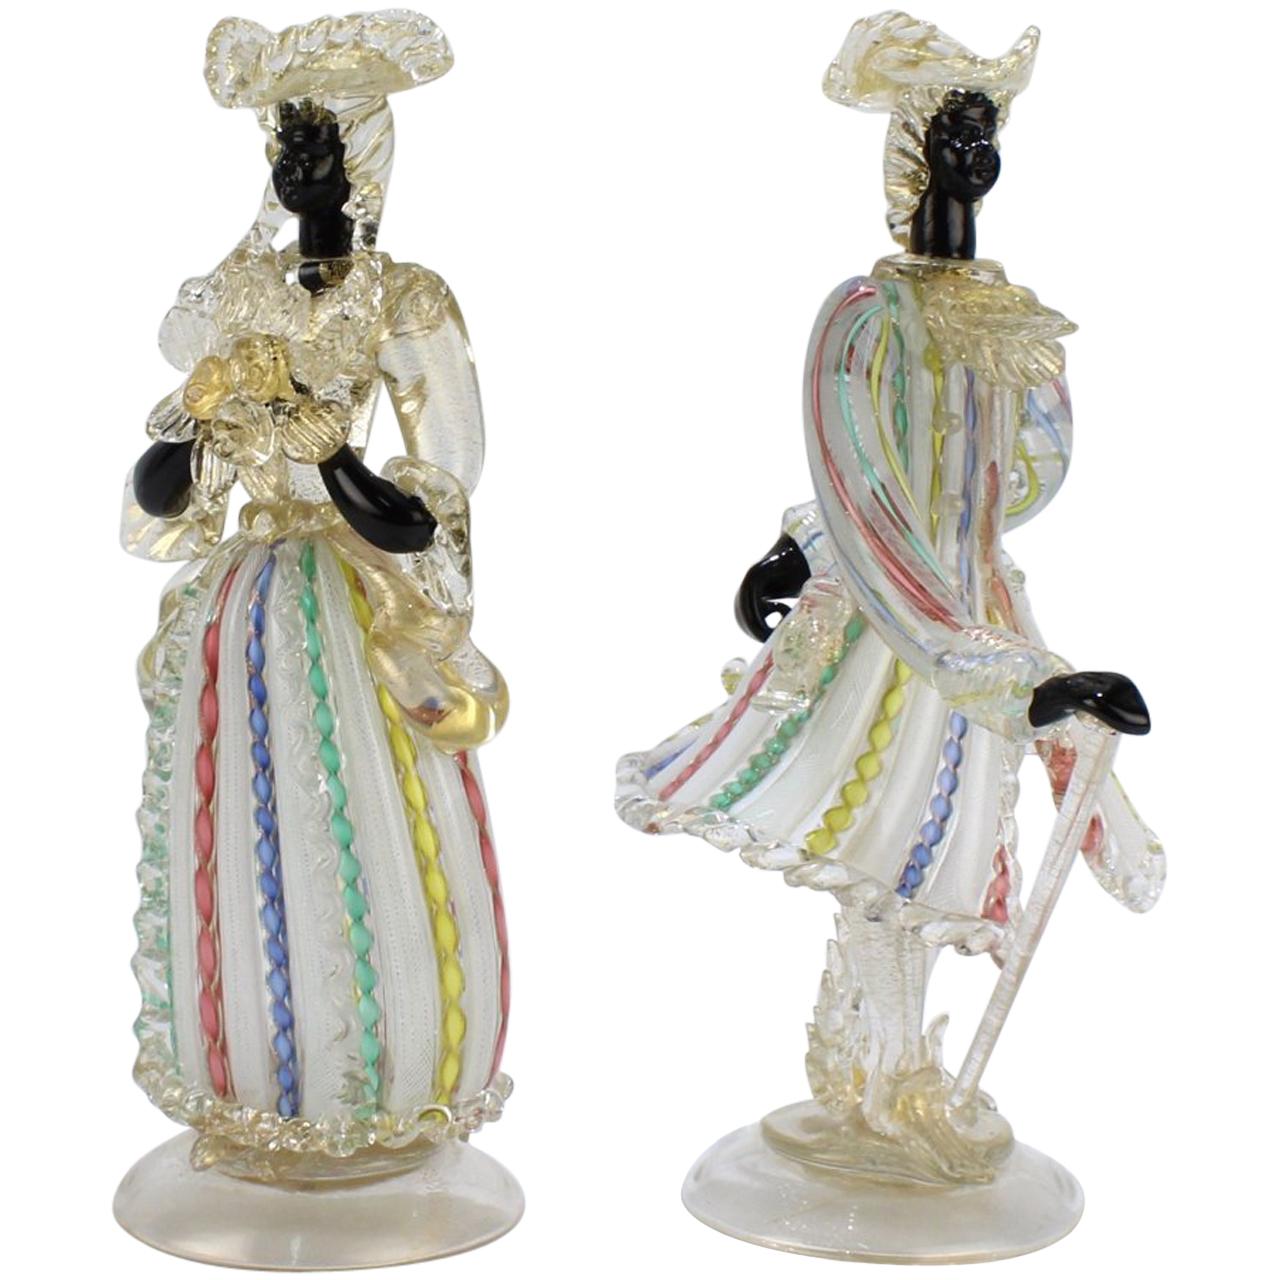 Pair of Vintage Murano Glass Lady and Gentleman Figurines